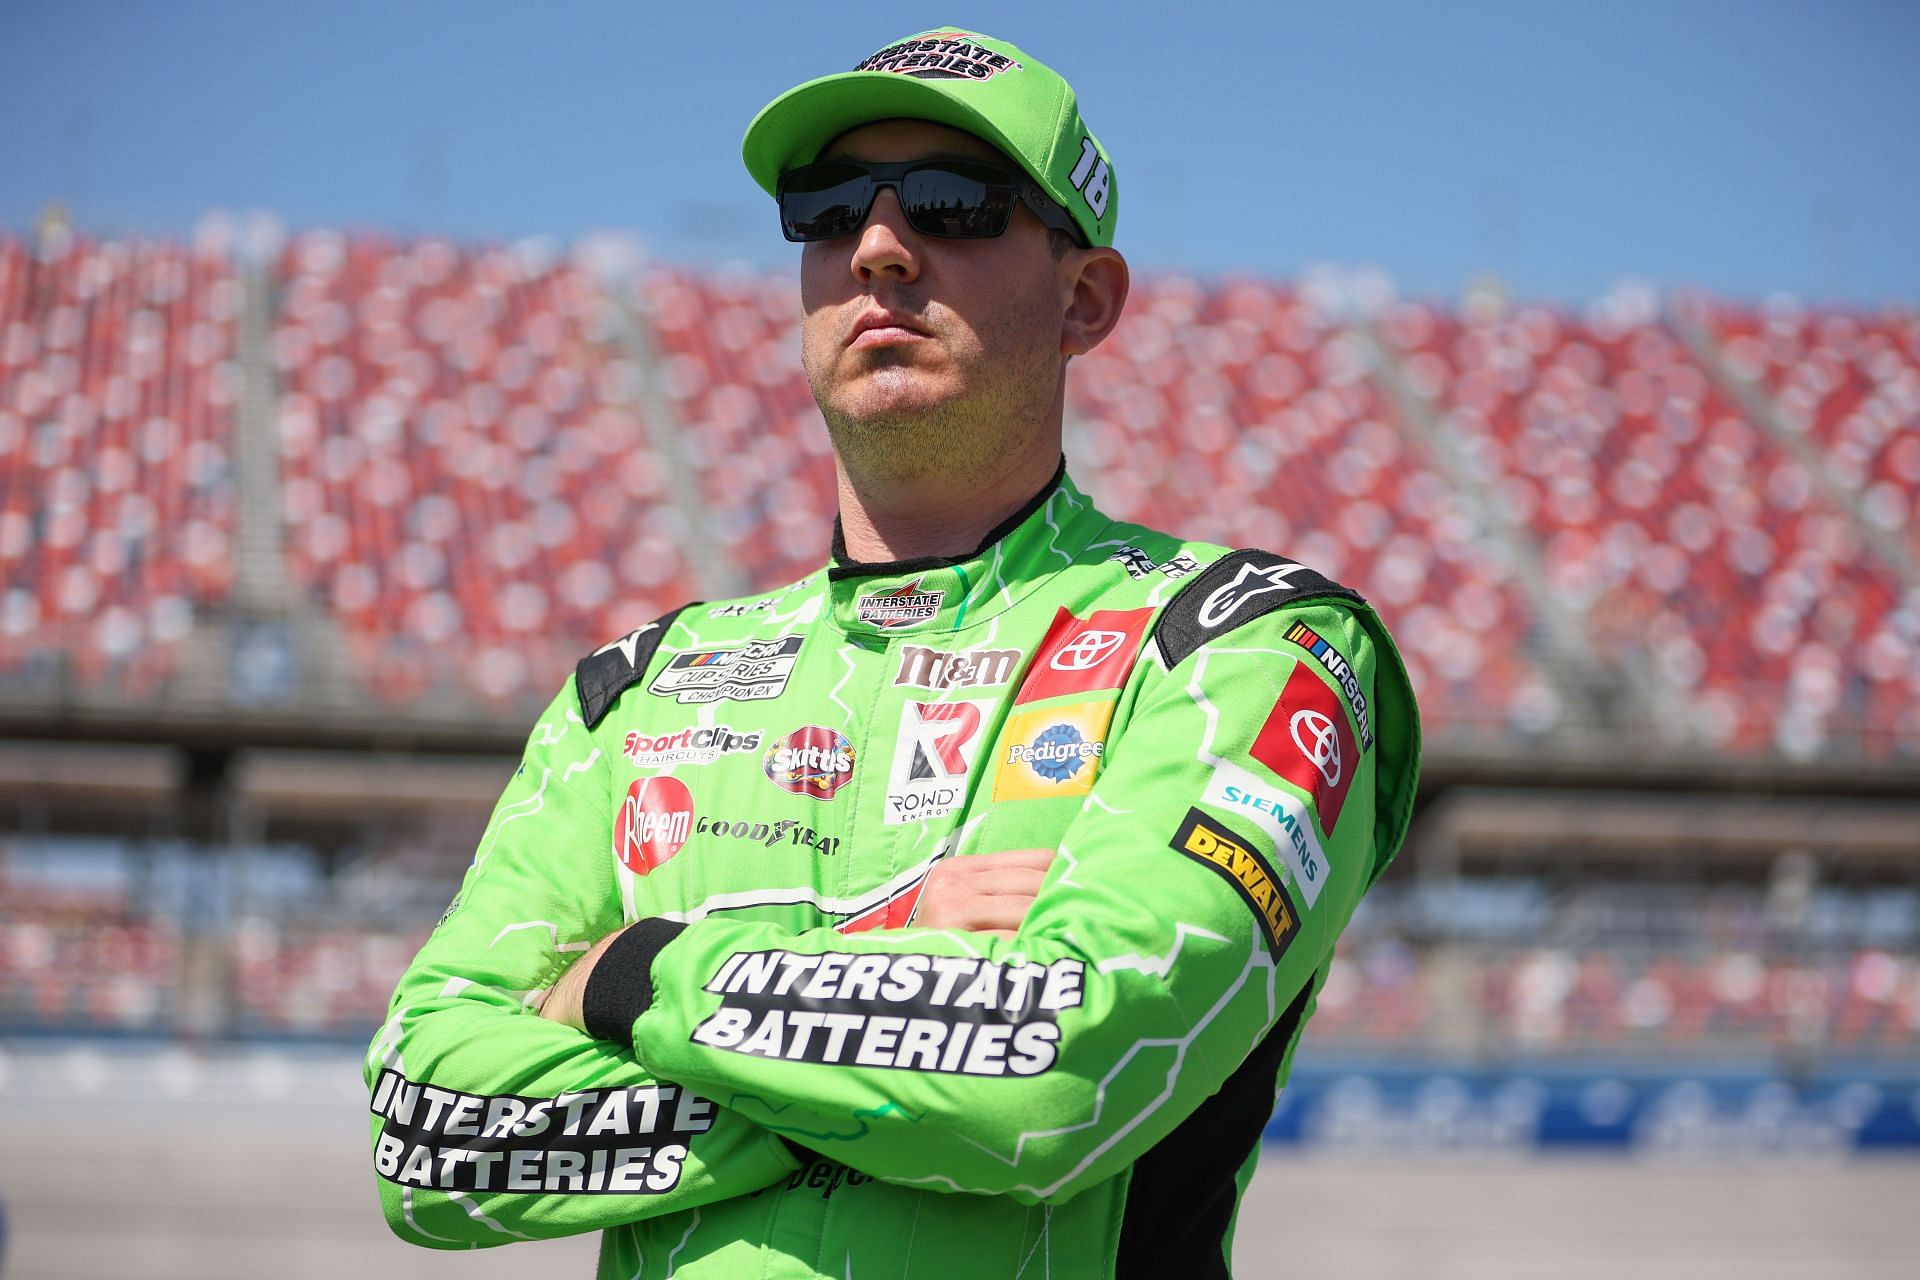 Kyle Busch looks on during qualifying for the NASCAR Cup Series GEICO 500 at Talladega Superspeedway. (Photo by James Gilbert/Getty Images)